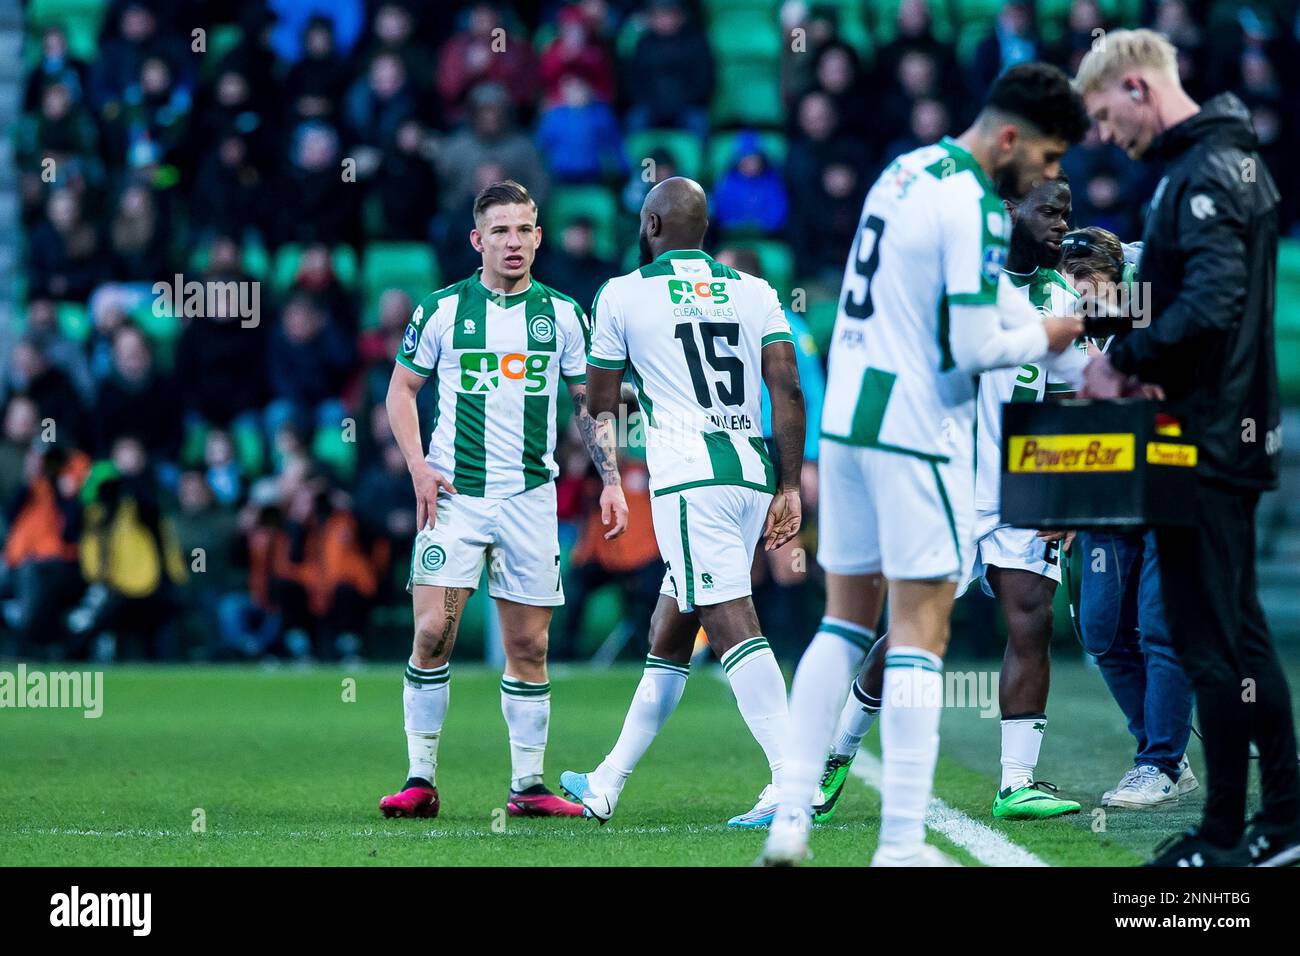 GRONINGEN - (m) 22-time international Jetro Willems makes his debut for FC Groningen during the Dutch premier league match between FC Groningen and Excelsior at the Euroborg stadium on February 25, 2023 in Groningen, Netherlands. ANP COR LASKER Stock Photo